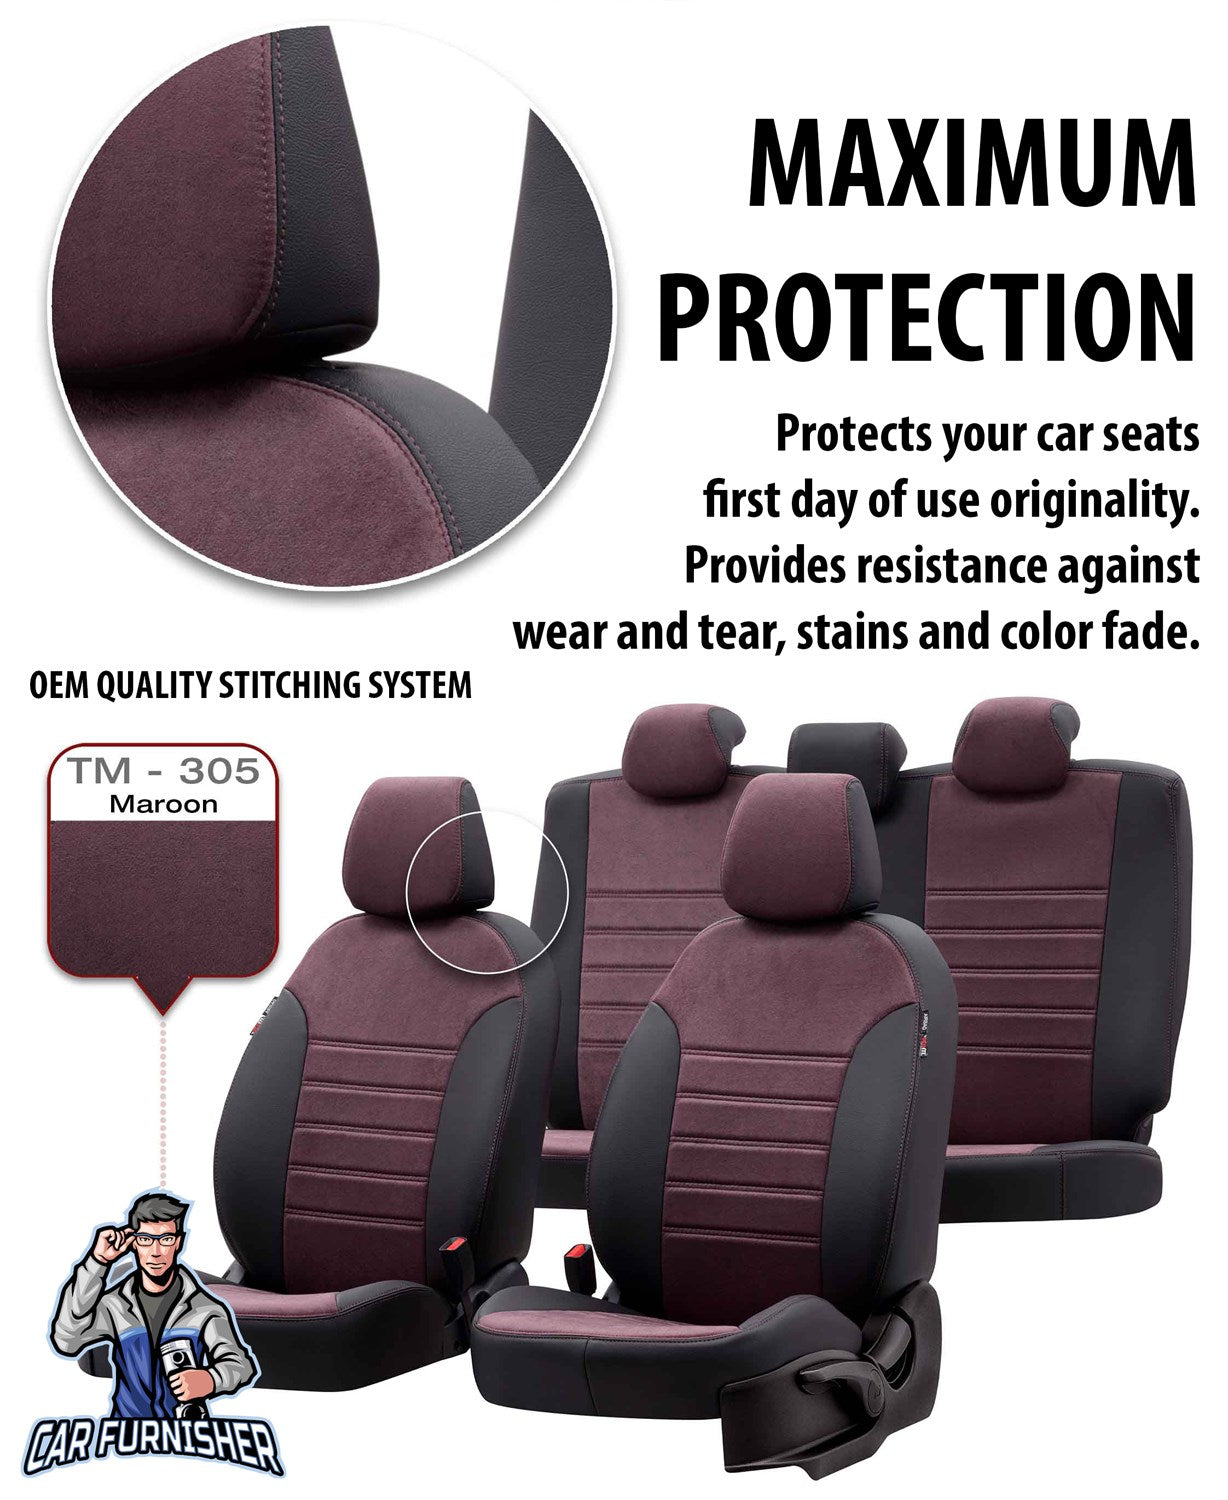 Mitsubishi Spacestar Seat Cover Milano Suede Design Smoked Black Leather & Suede Fabric